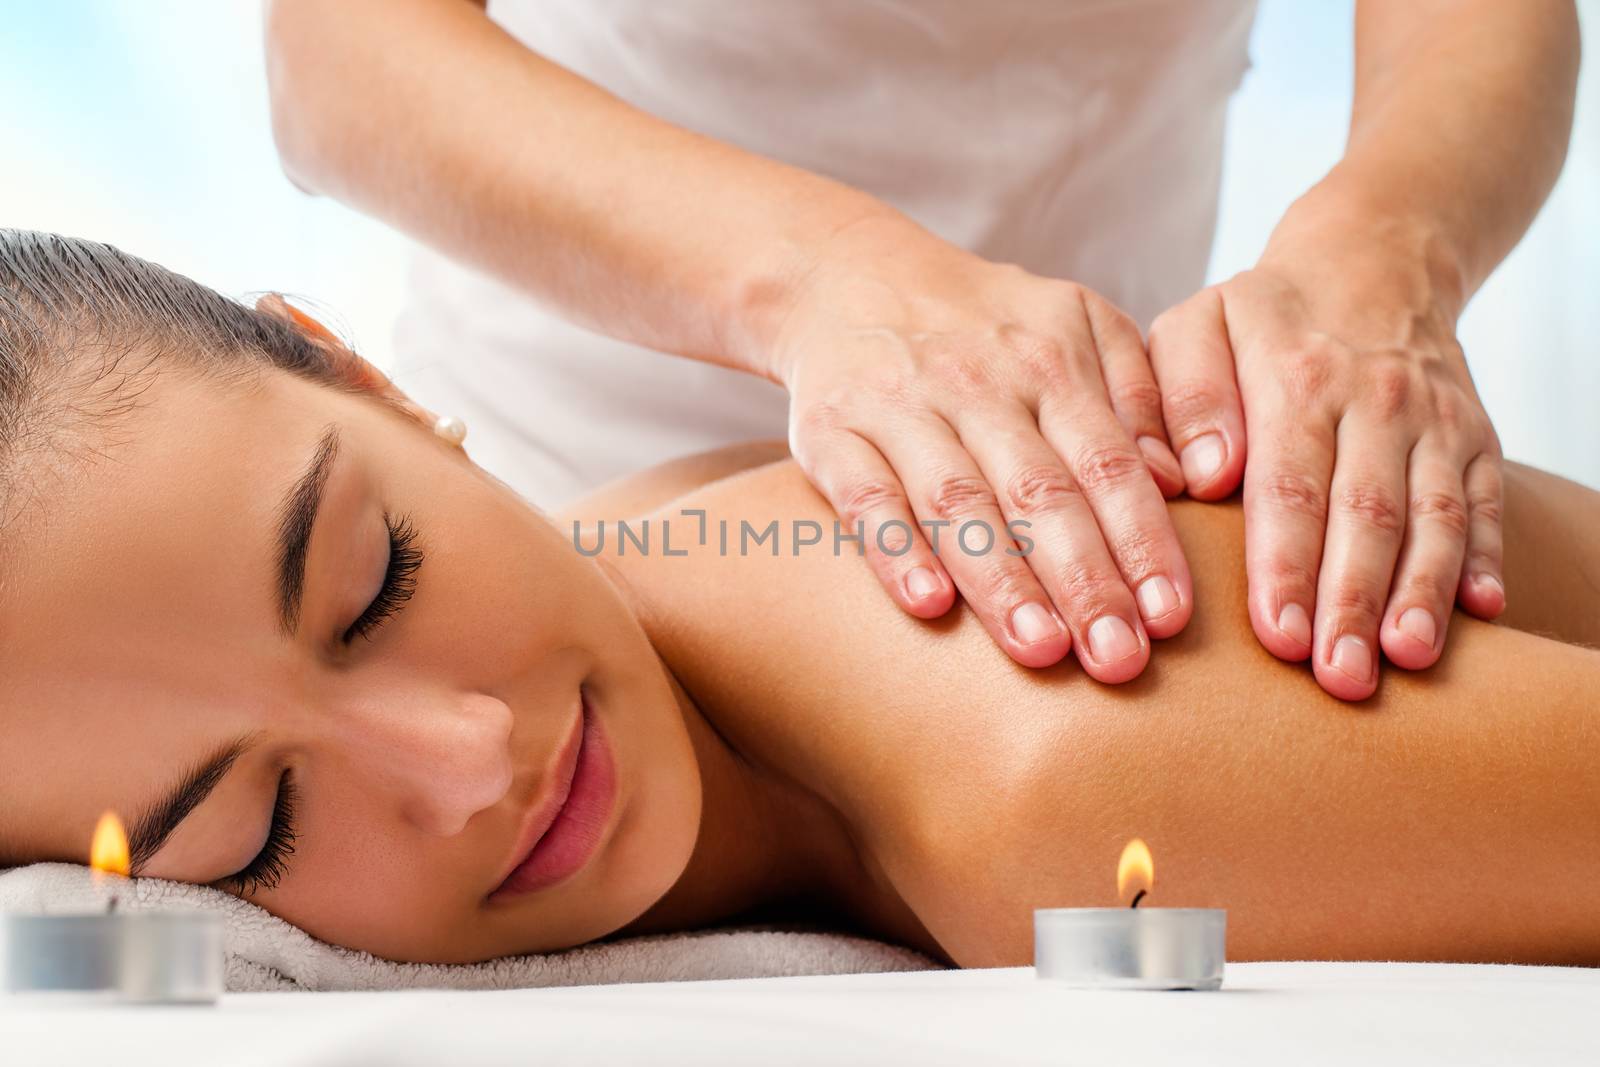 Attractive woman enjoying relaxing massage. by karelnoppe